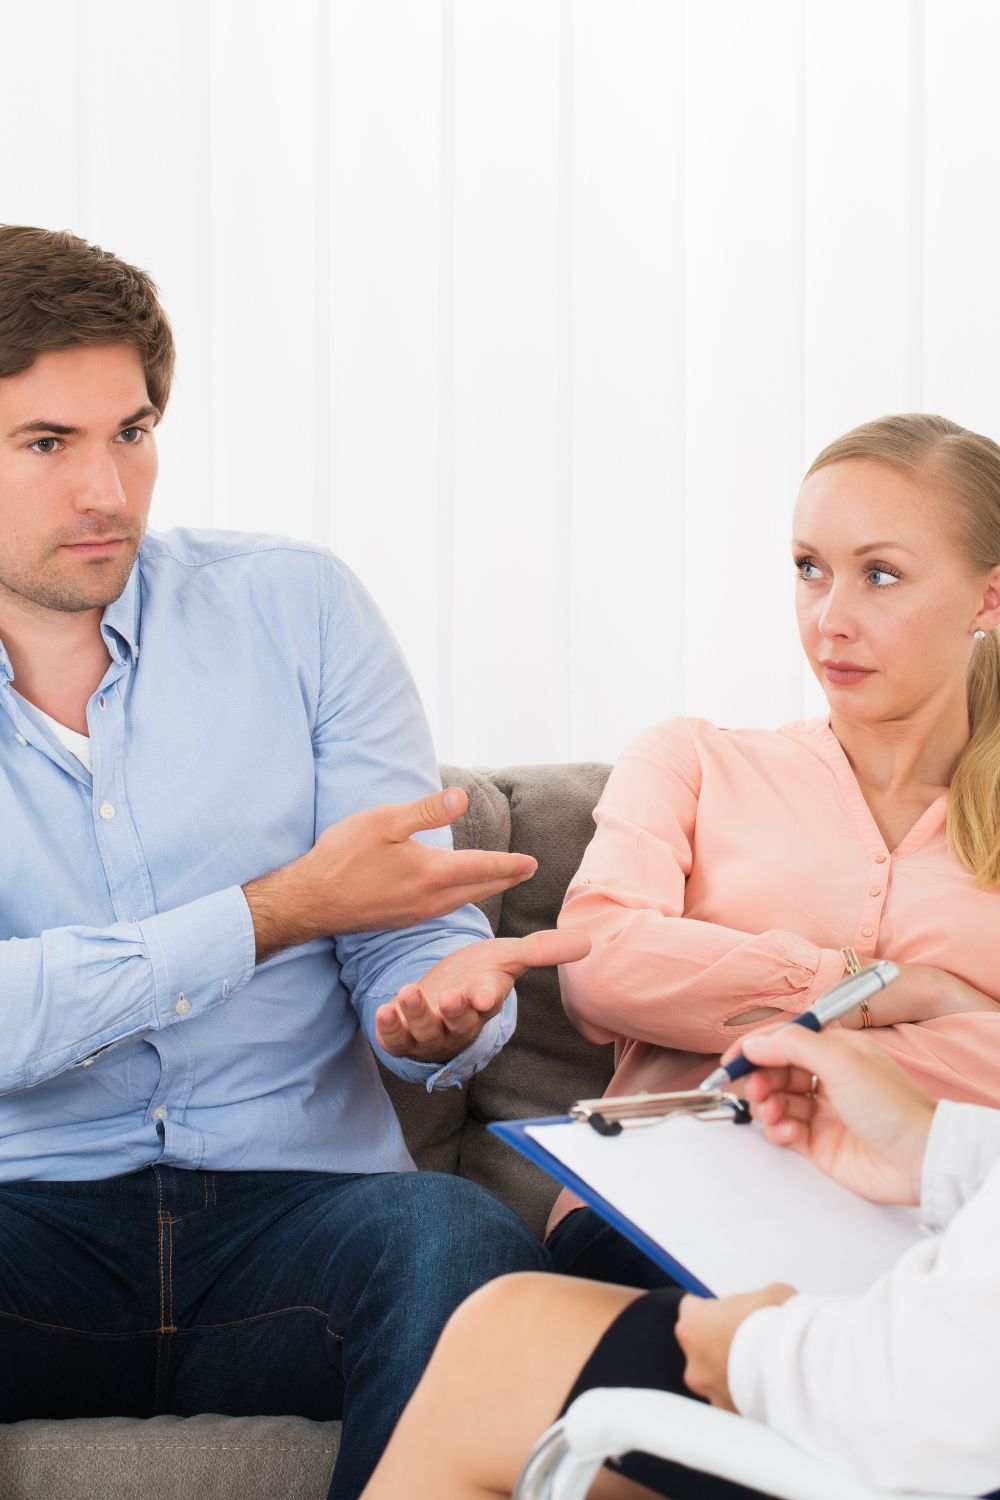 signs your husband is manipulating you